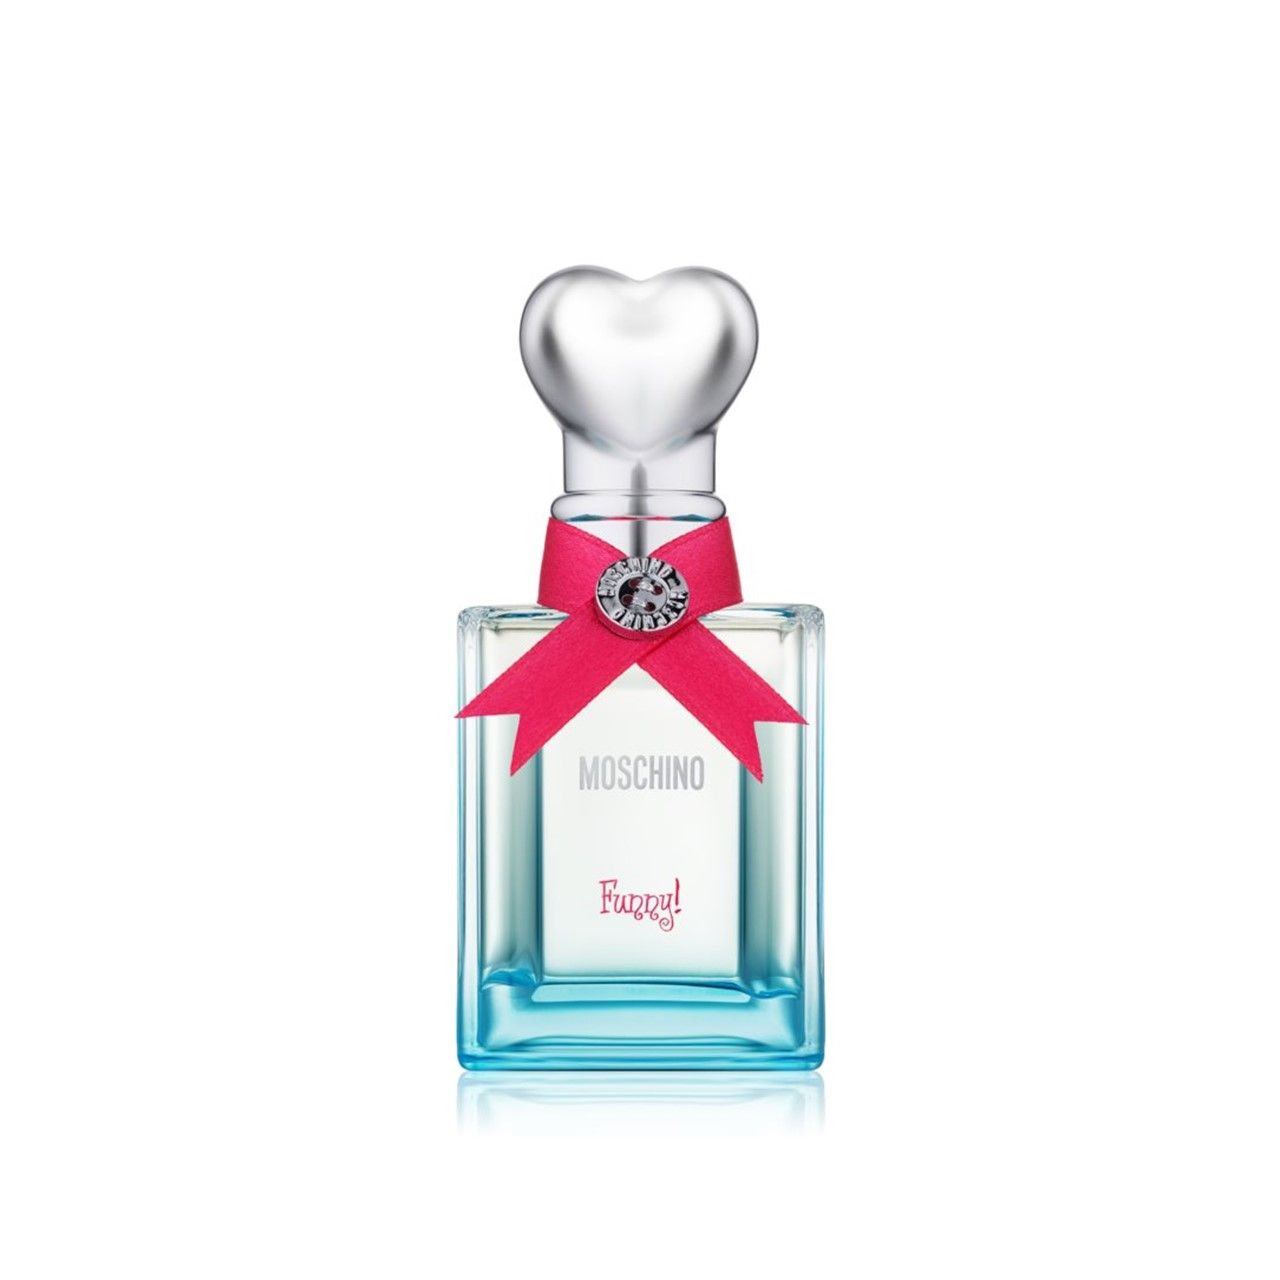 Moschino funny Lady EDT 50 ml-. Moschino funny 100ml EDT Test. Moschino funny Eau de Toilette 100 мл. Moschino funny! EDT, 100 ml.